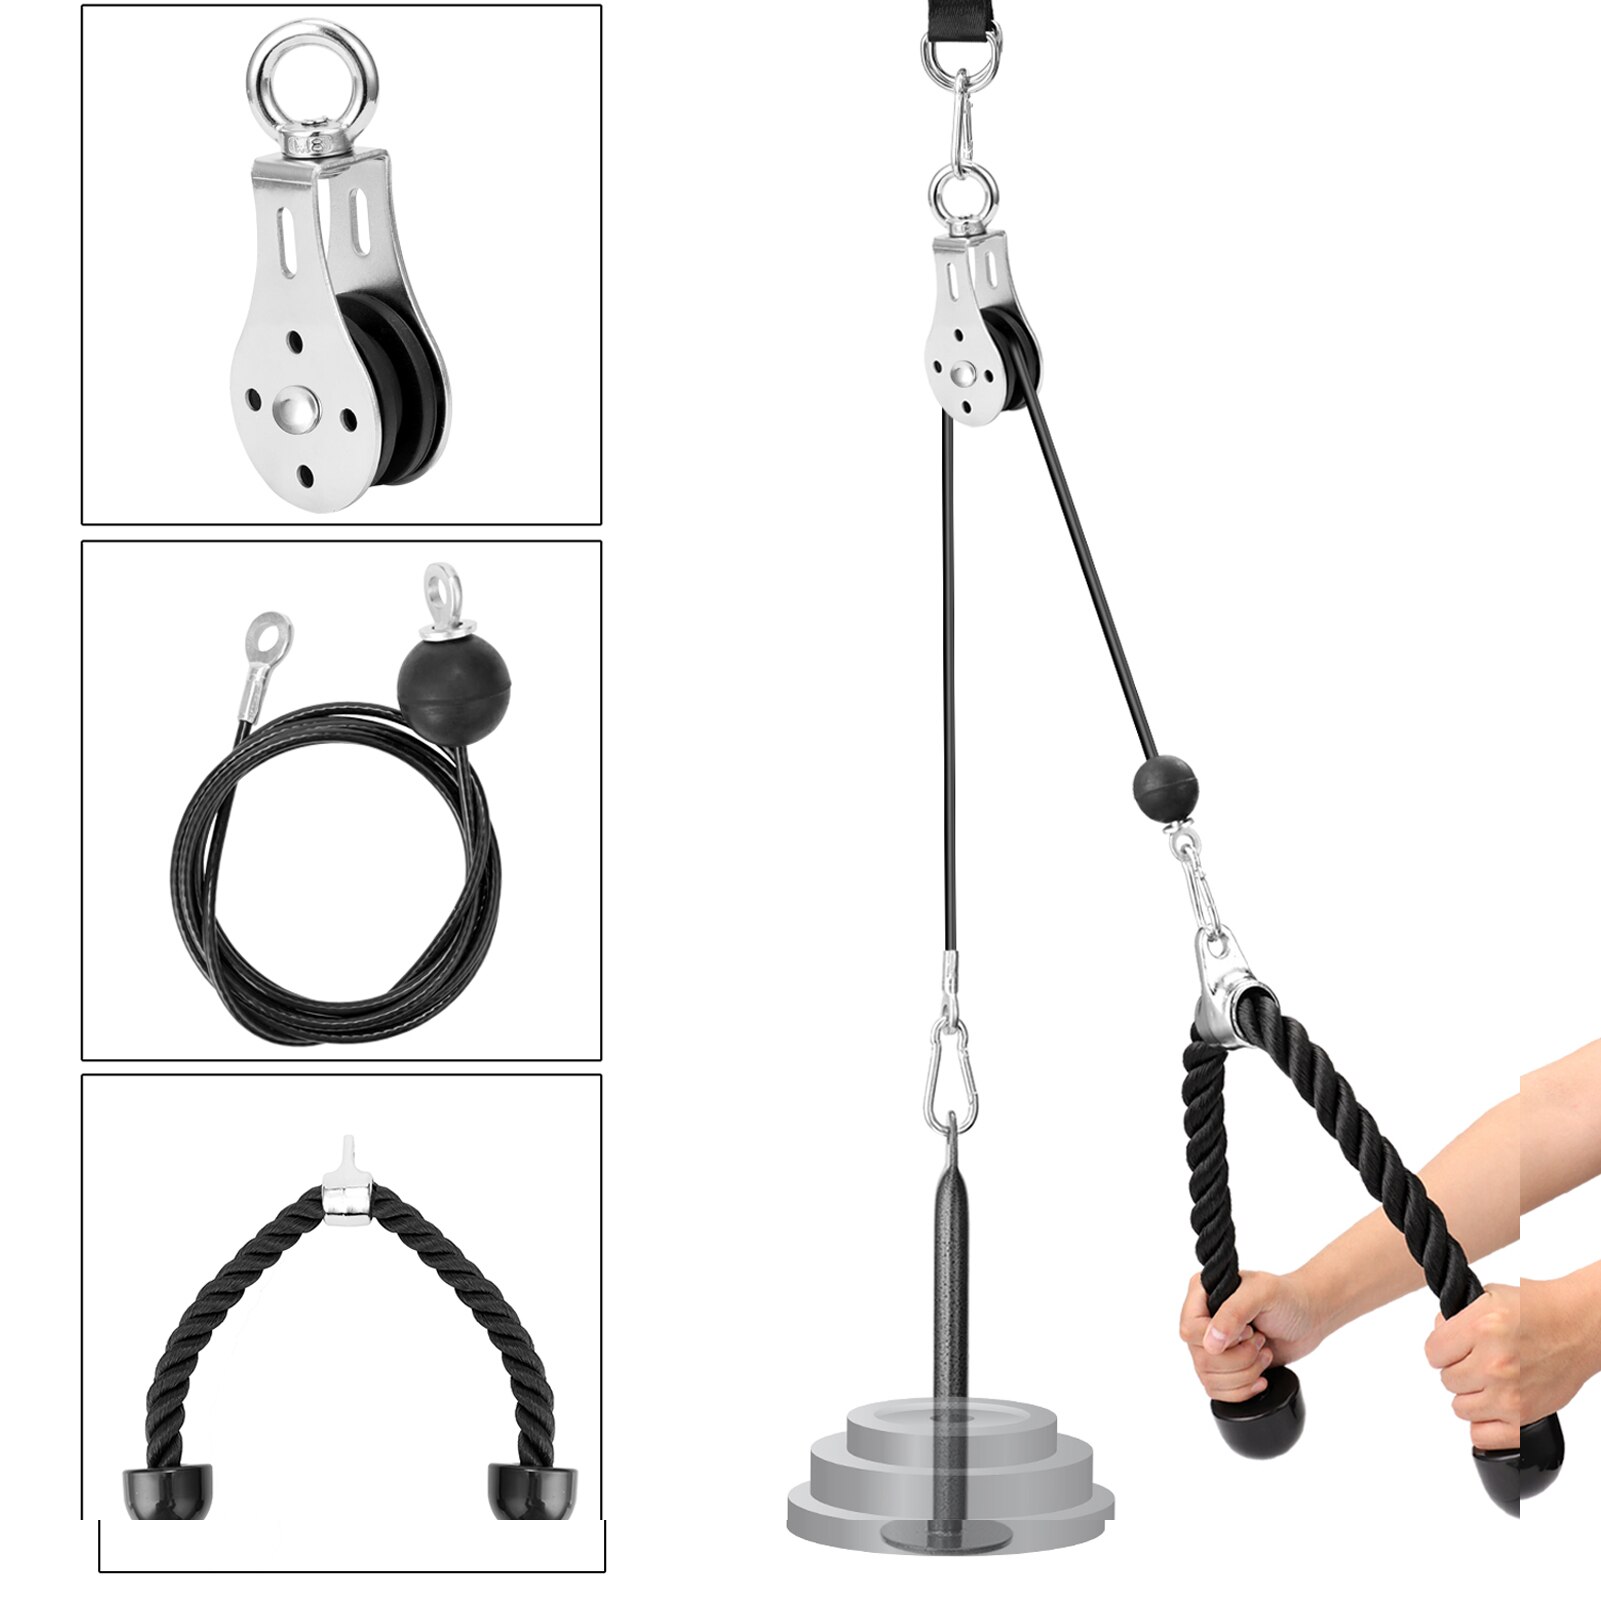 Gym Fitness DIY Pulley Cable Machine Attachments Pull Down Machine Full Set F1094 Back Muscle Biceps Triceps Blaster Trainer: Set B